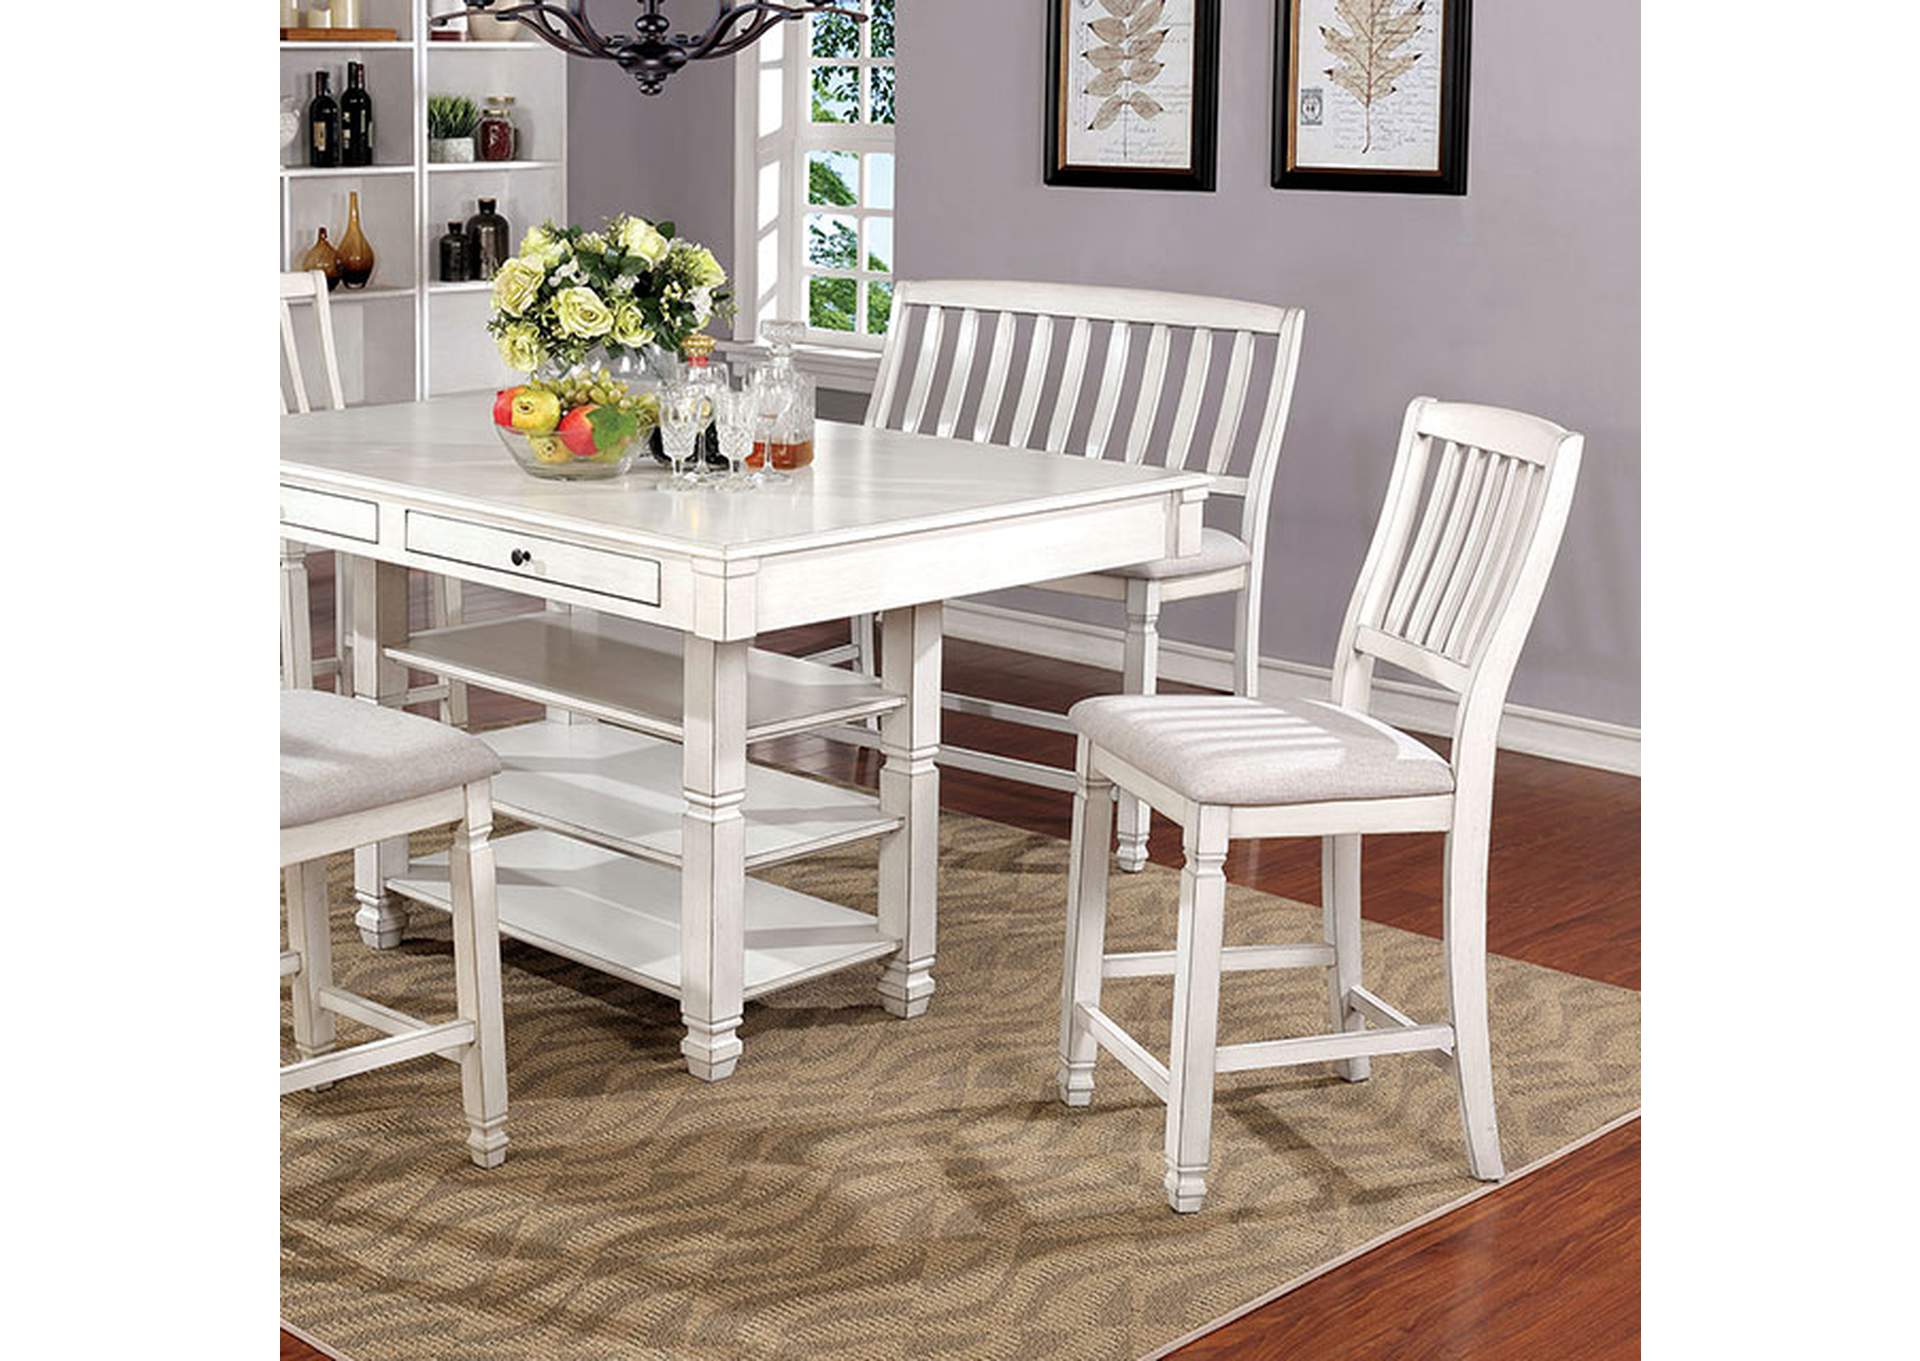 Kaliyah Antique White Counter Height Table,Furniture of America